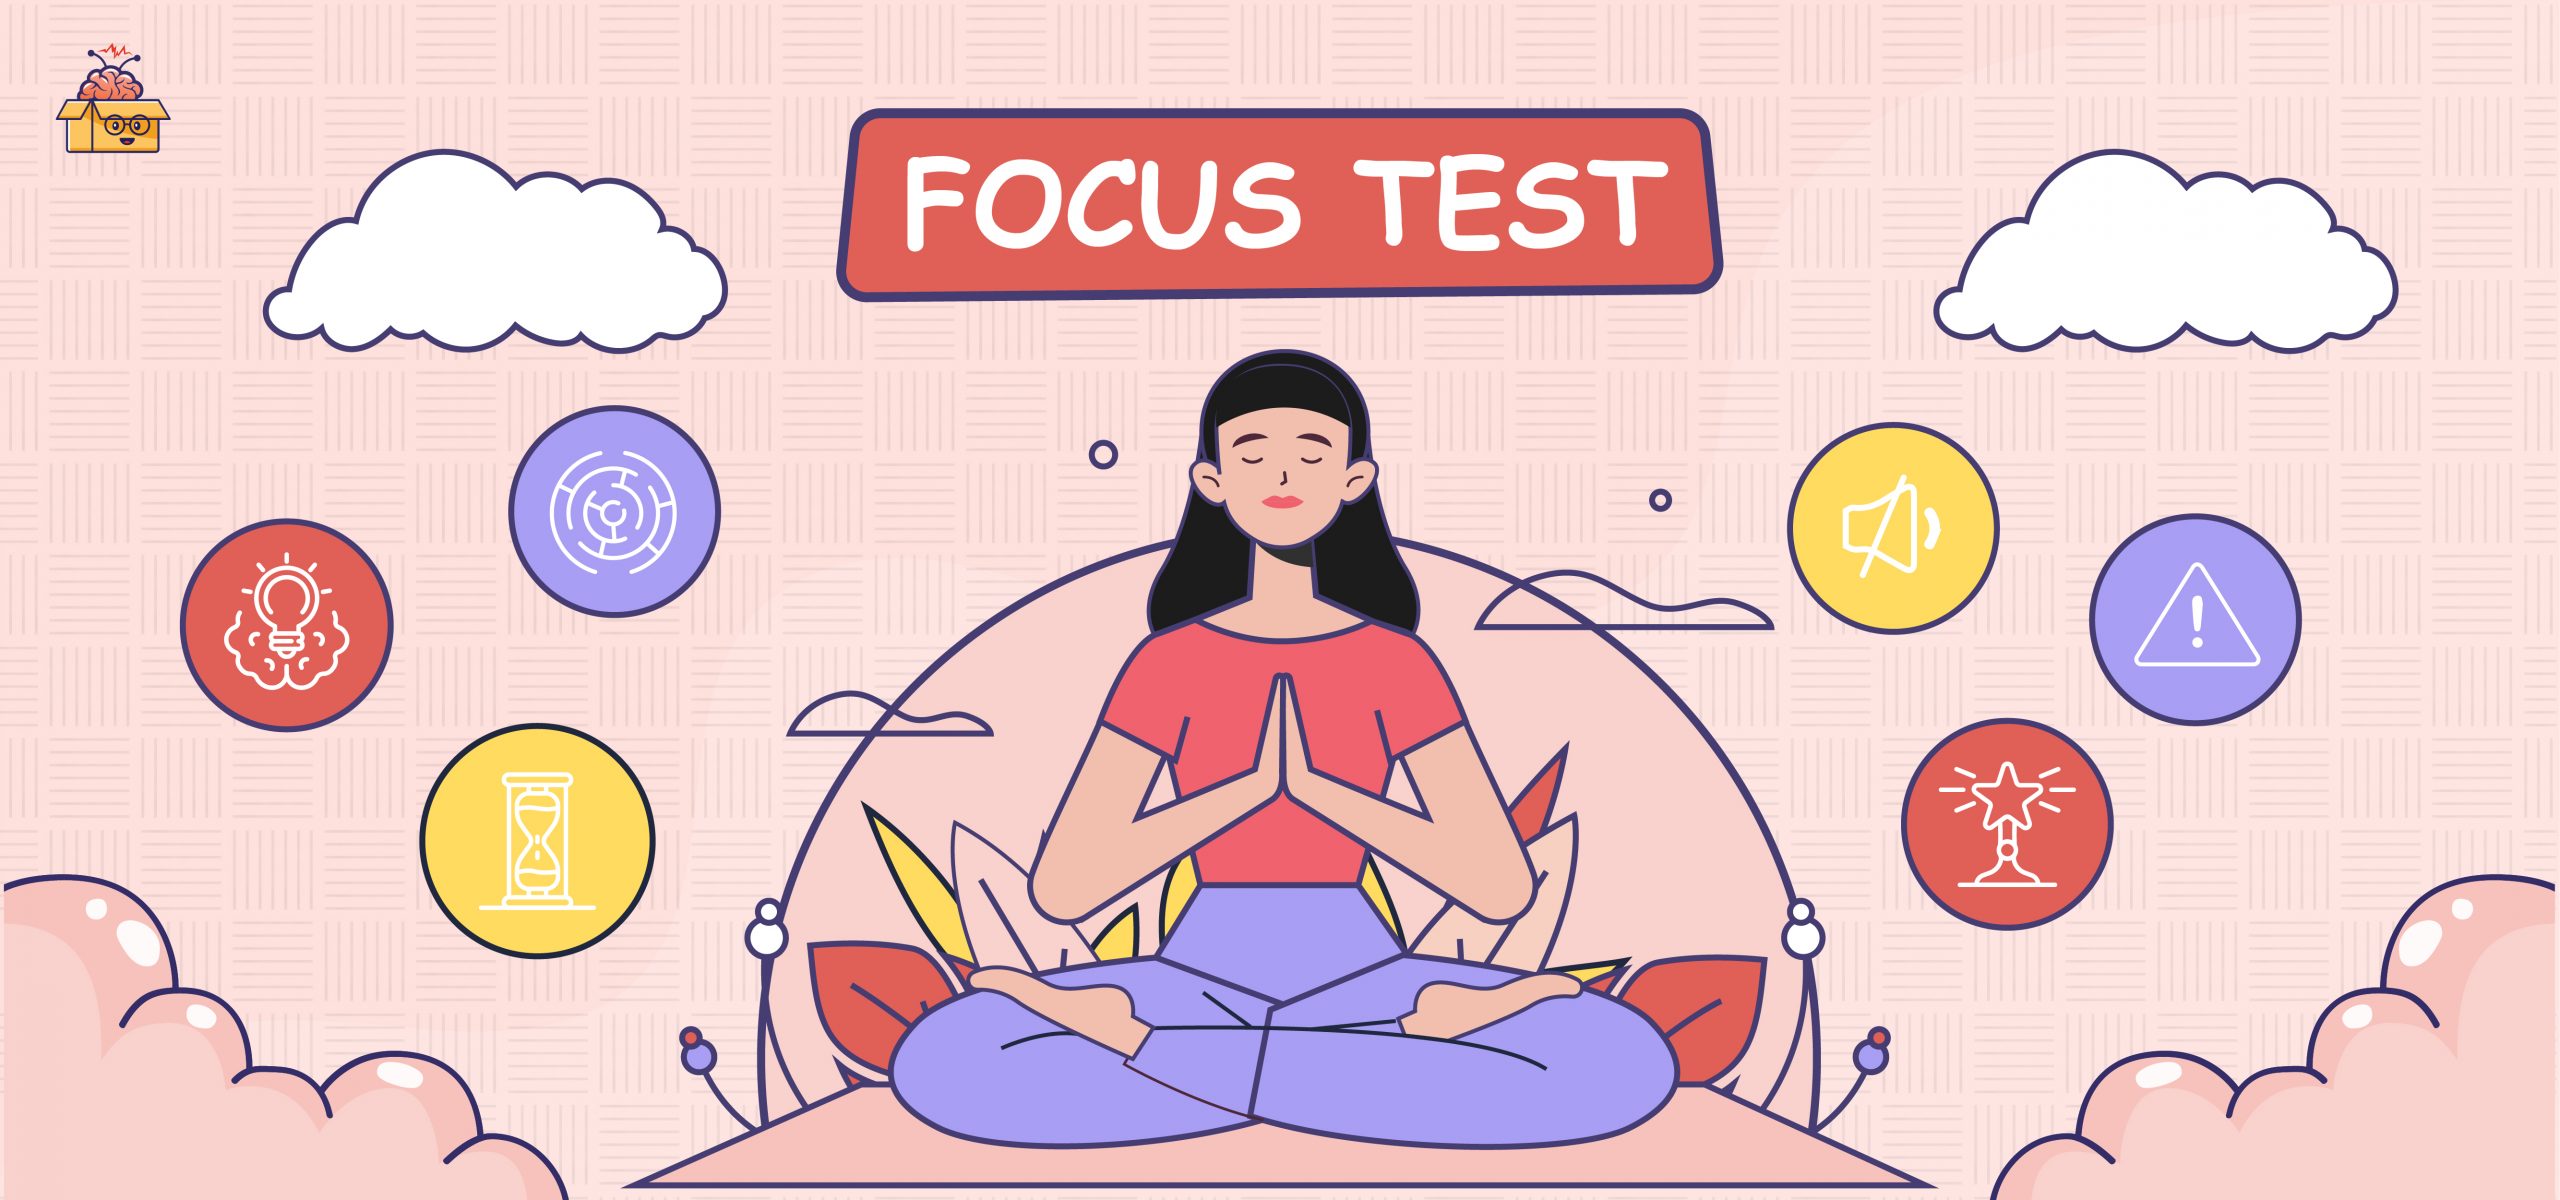 Focus Test – All About Measuring Attention and Focusing Skills